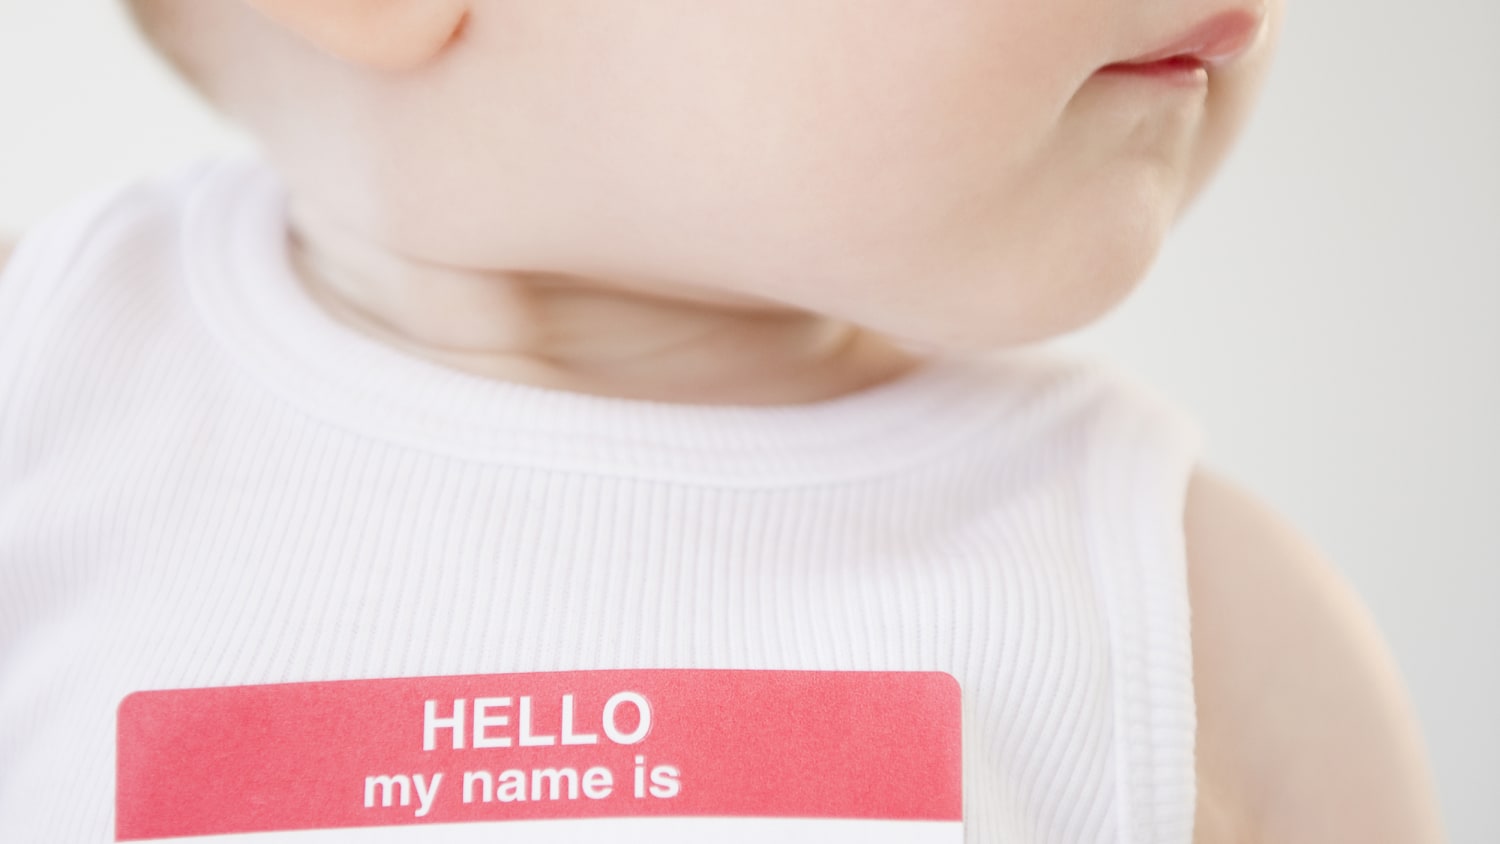 Baby-name stealing: For some parents, it's no joke - TODAY.com